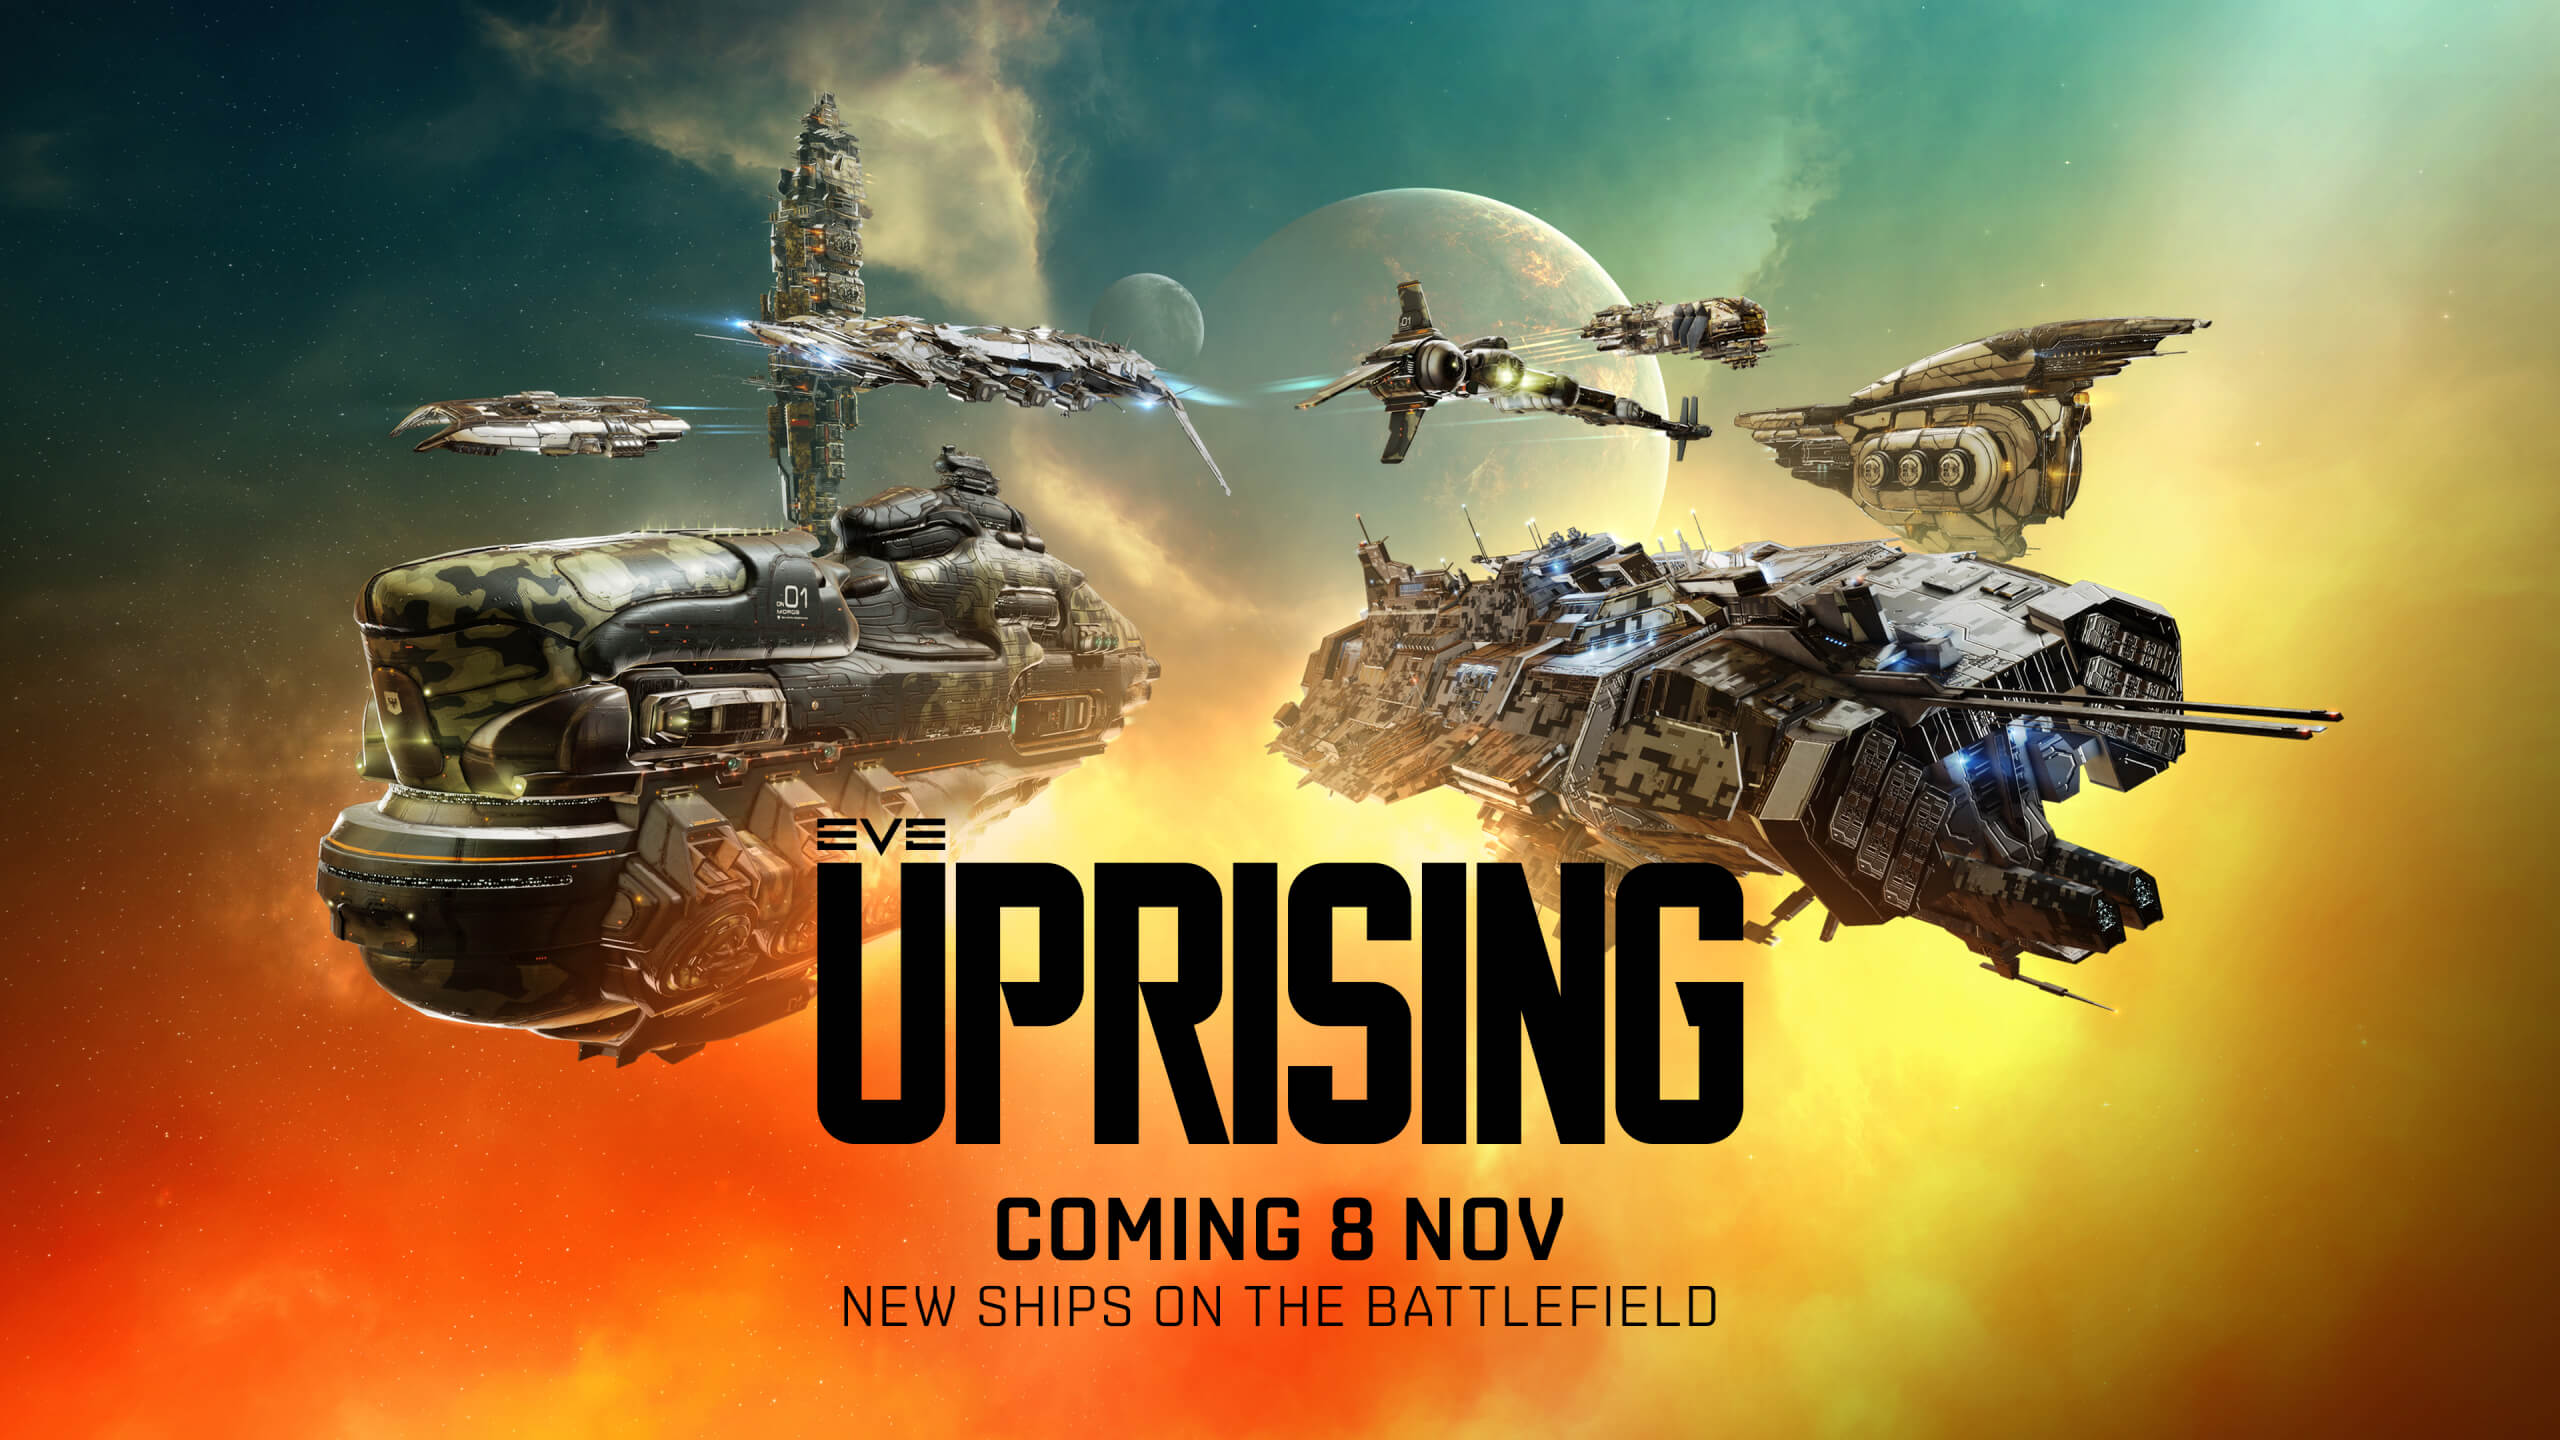 Choose your fight and fly your colors in the Uprising expansion ...